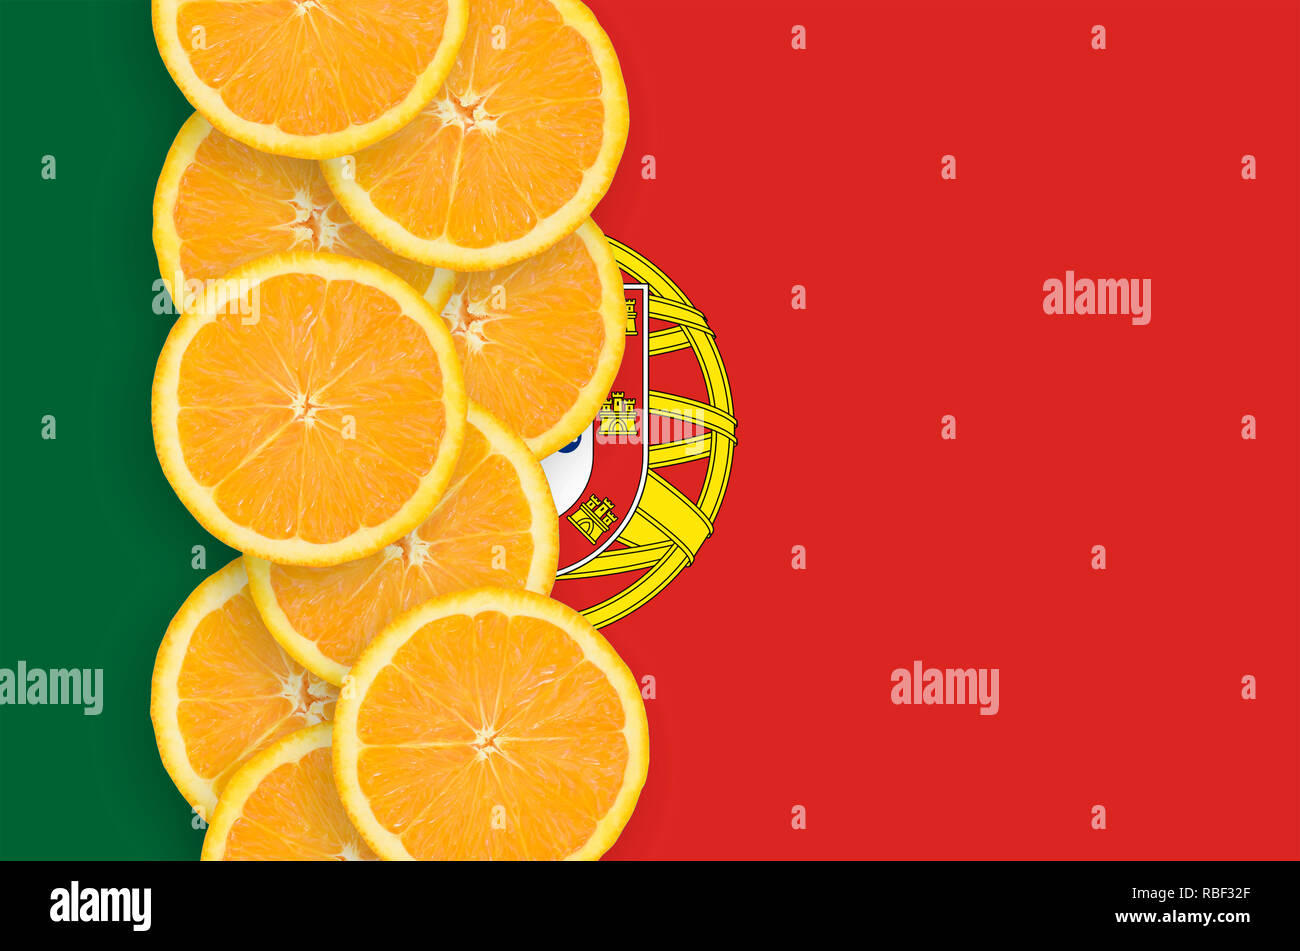 Portugal flag and vertical row of orange citrus fruit slices. Concept of growing as well as import and export of citrus fruits Stock Photo